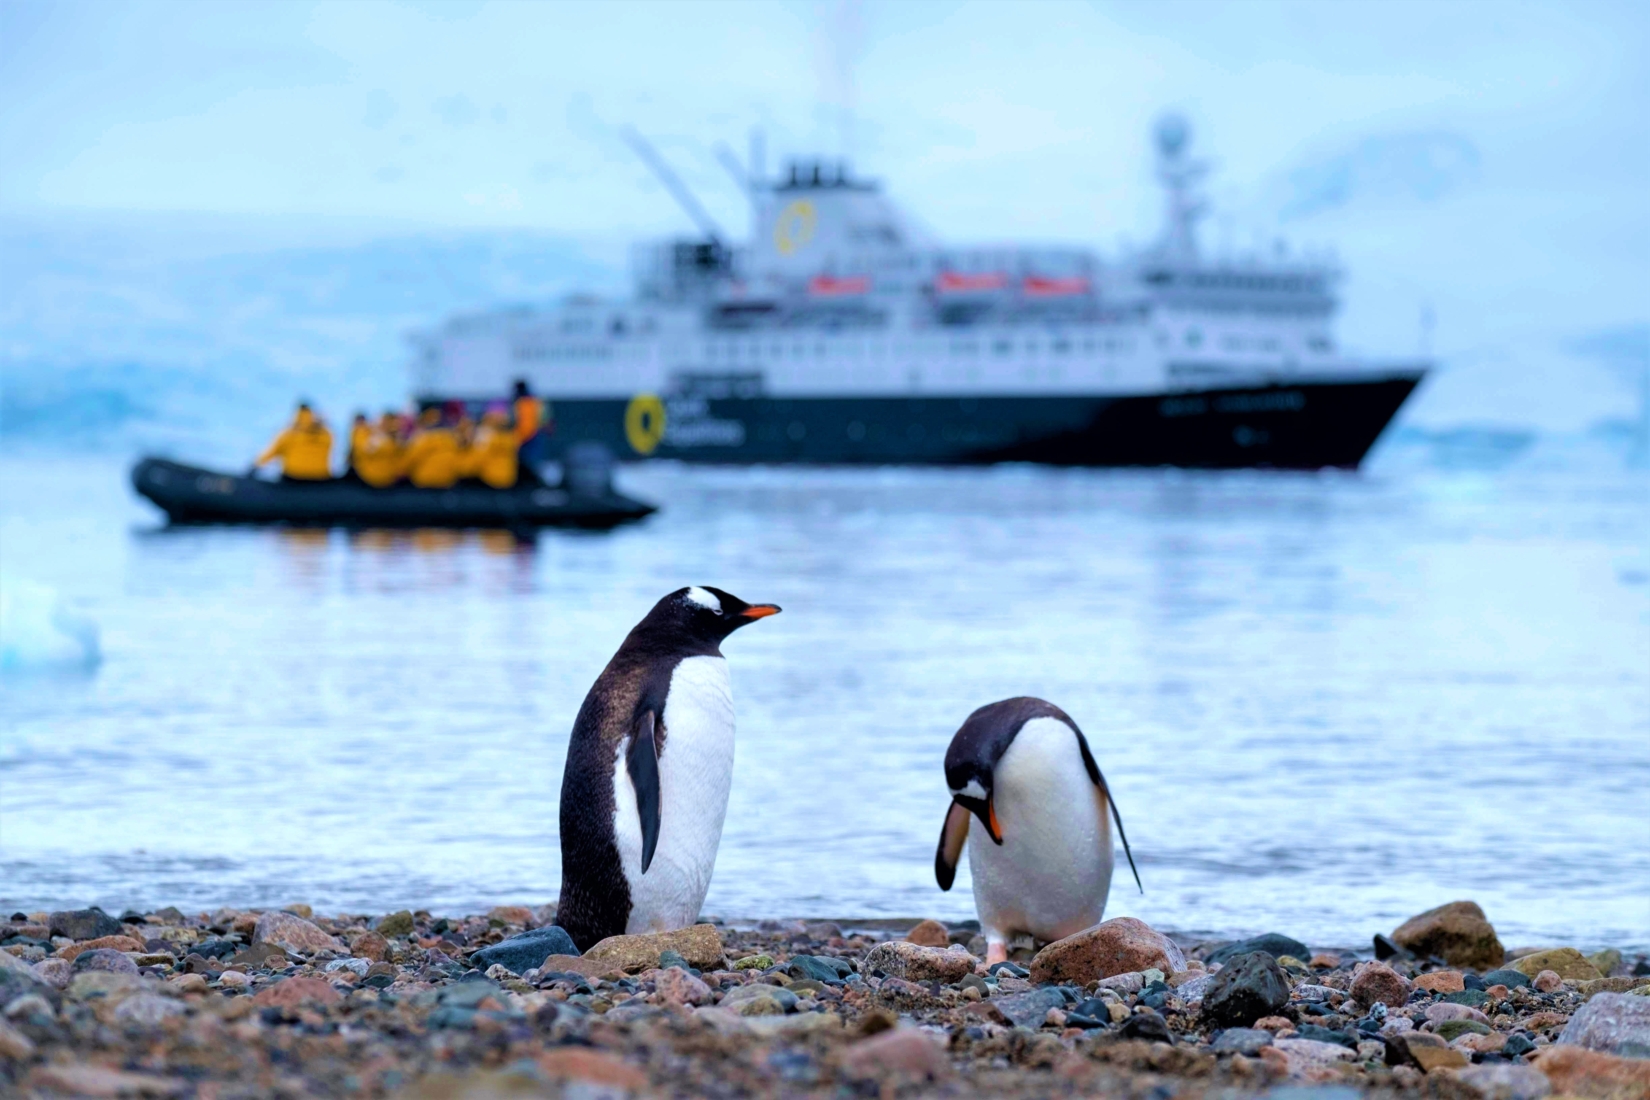 Two penguins on a rocky shore with a large ship and travelers on an inflatable boat behind them in Antarctica